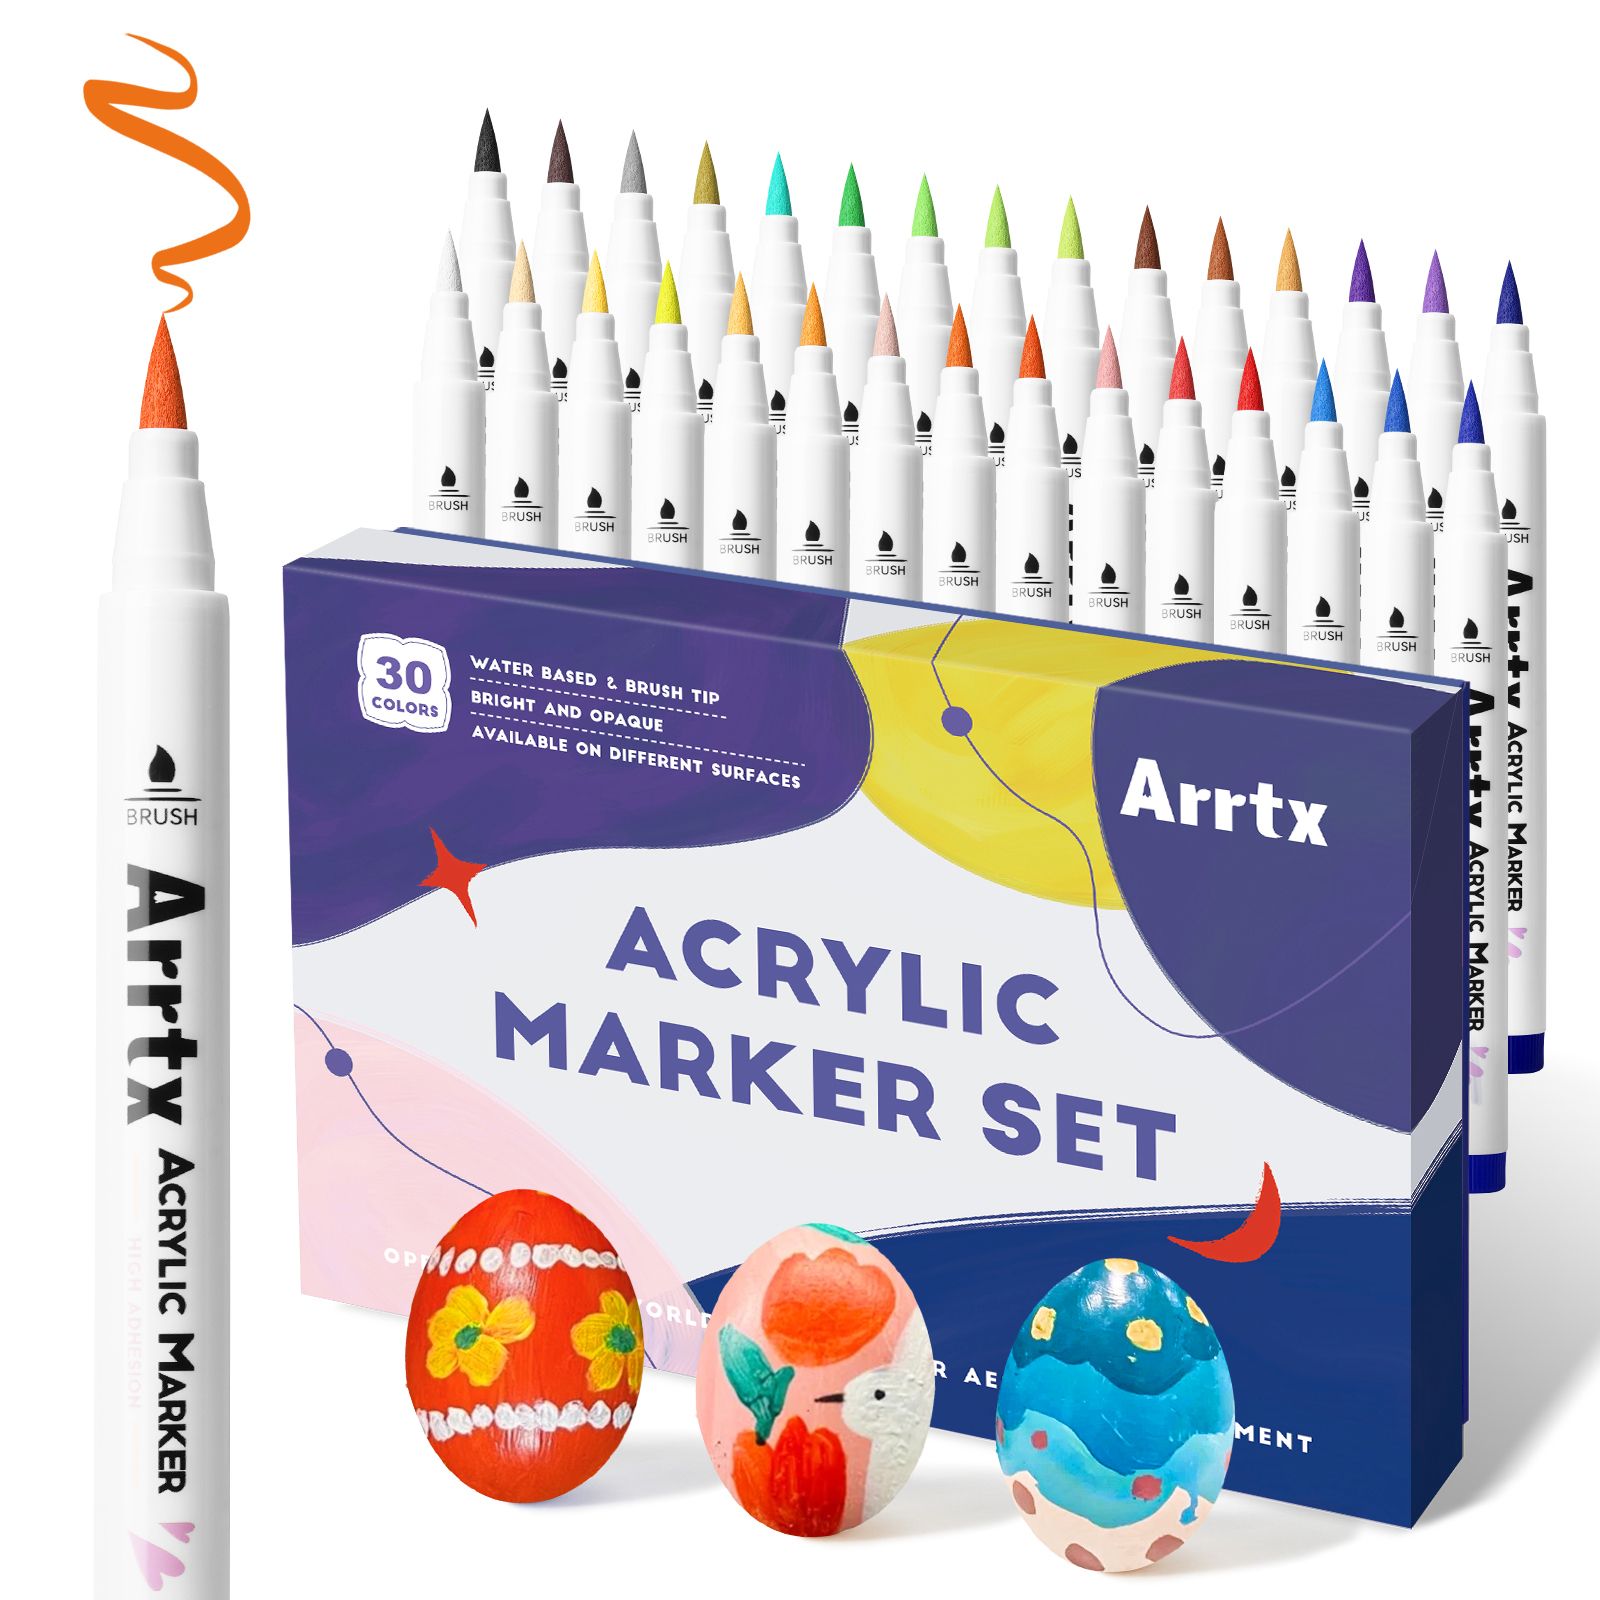 Wholesale Markers Arrtx 30 Pastel Colors Acrylic Brush Marker Paint Pens  For Stone Glass Easter Egg Wood And Fabric Painting No Toxic No Odor 230826  From Zhong09, $22.68